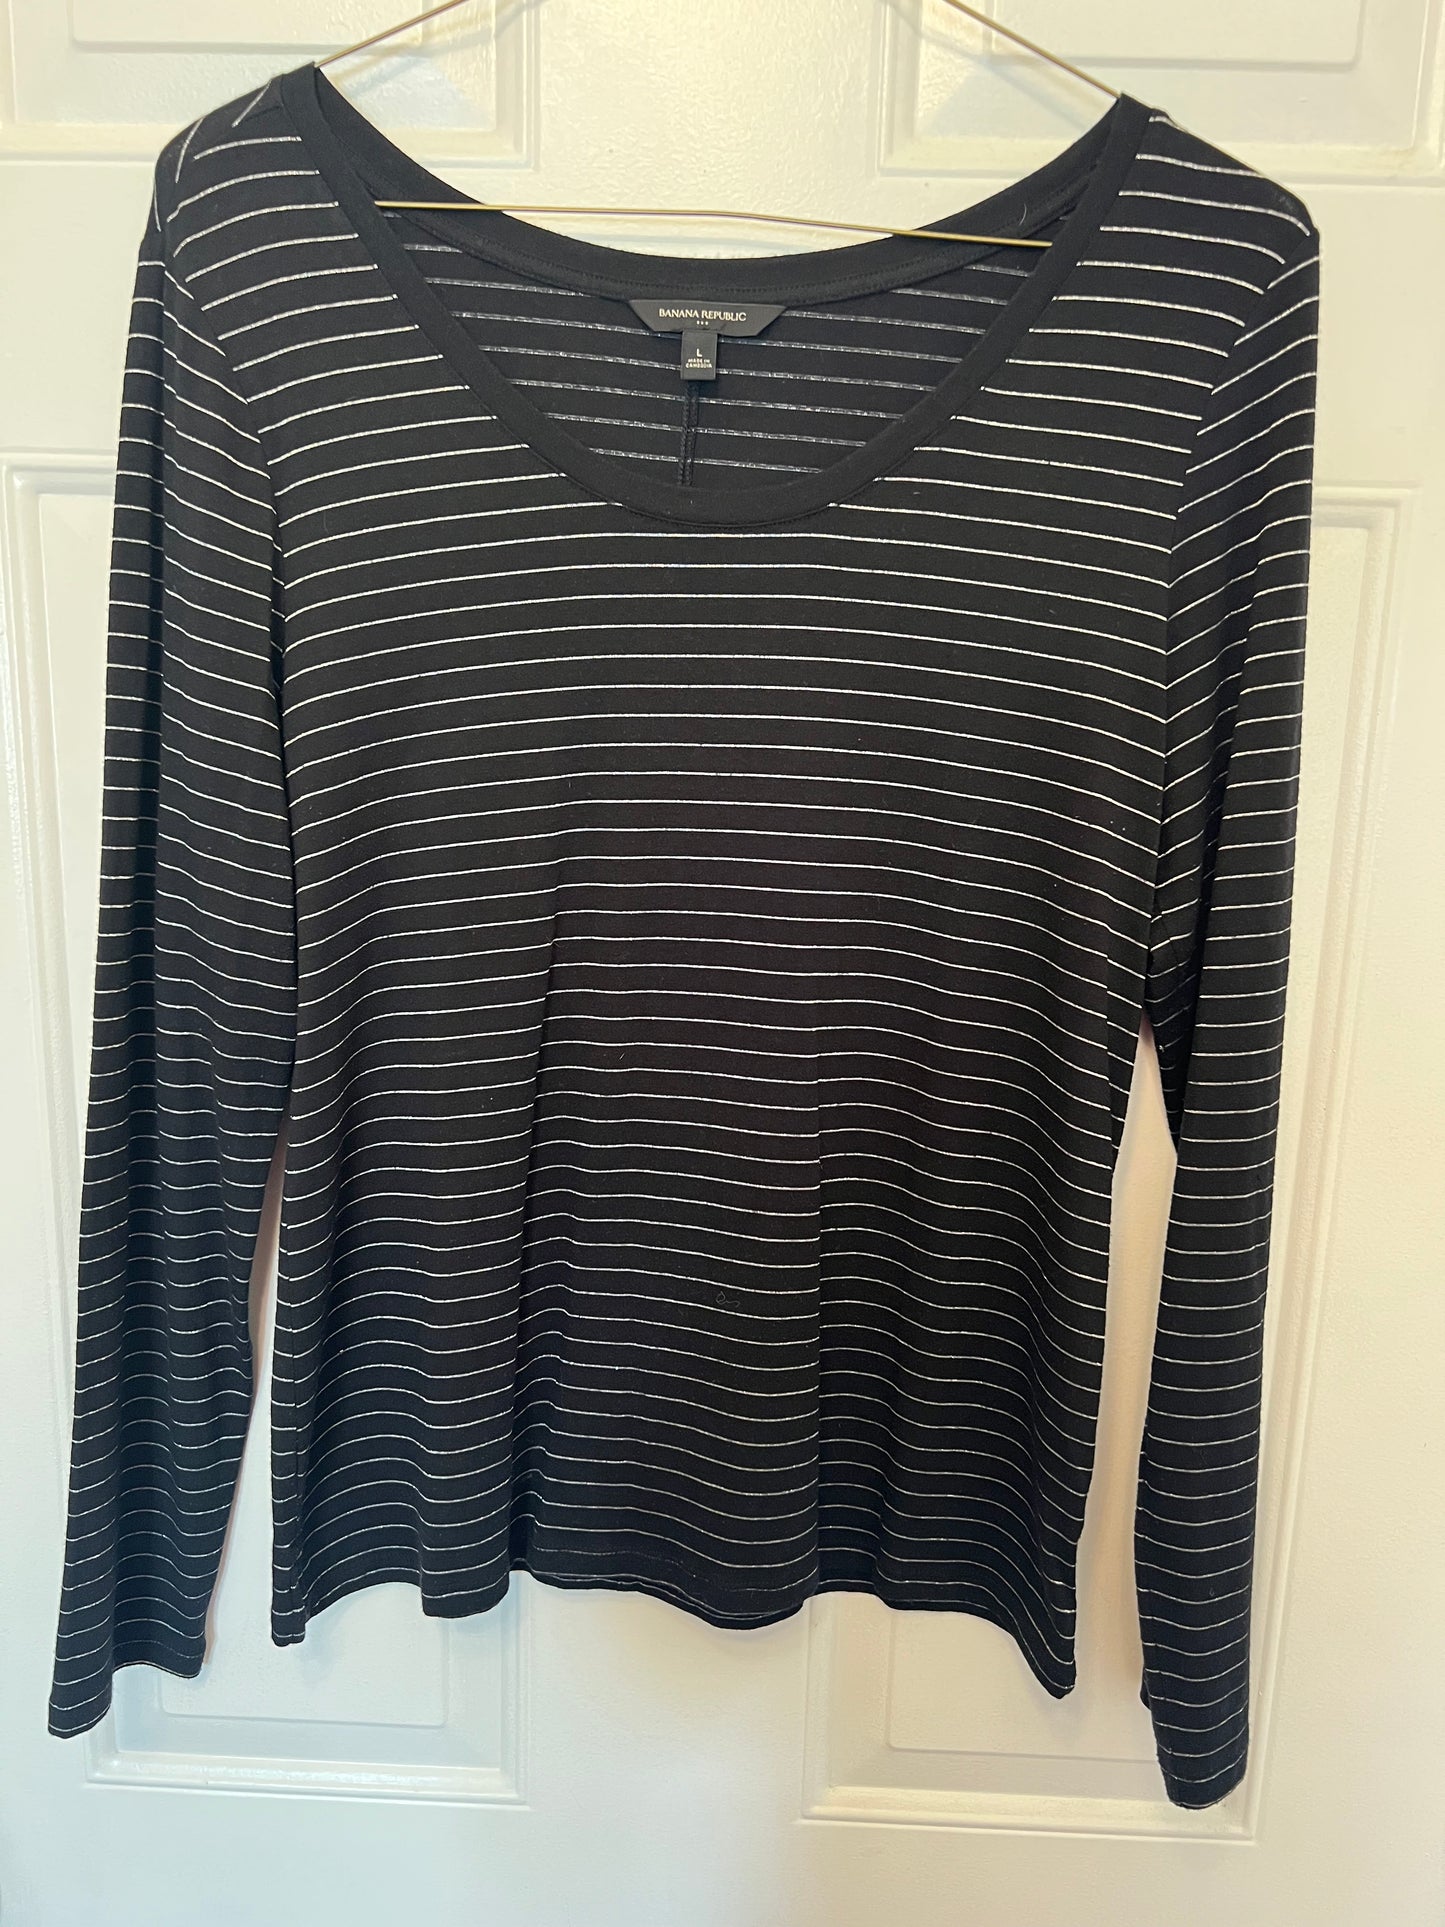 Banana Republic womens size large black with silver stripe long sleave top.